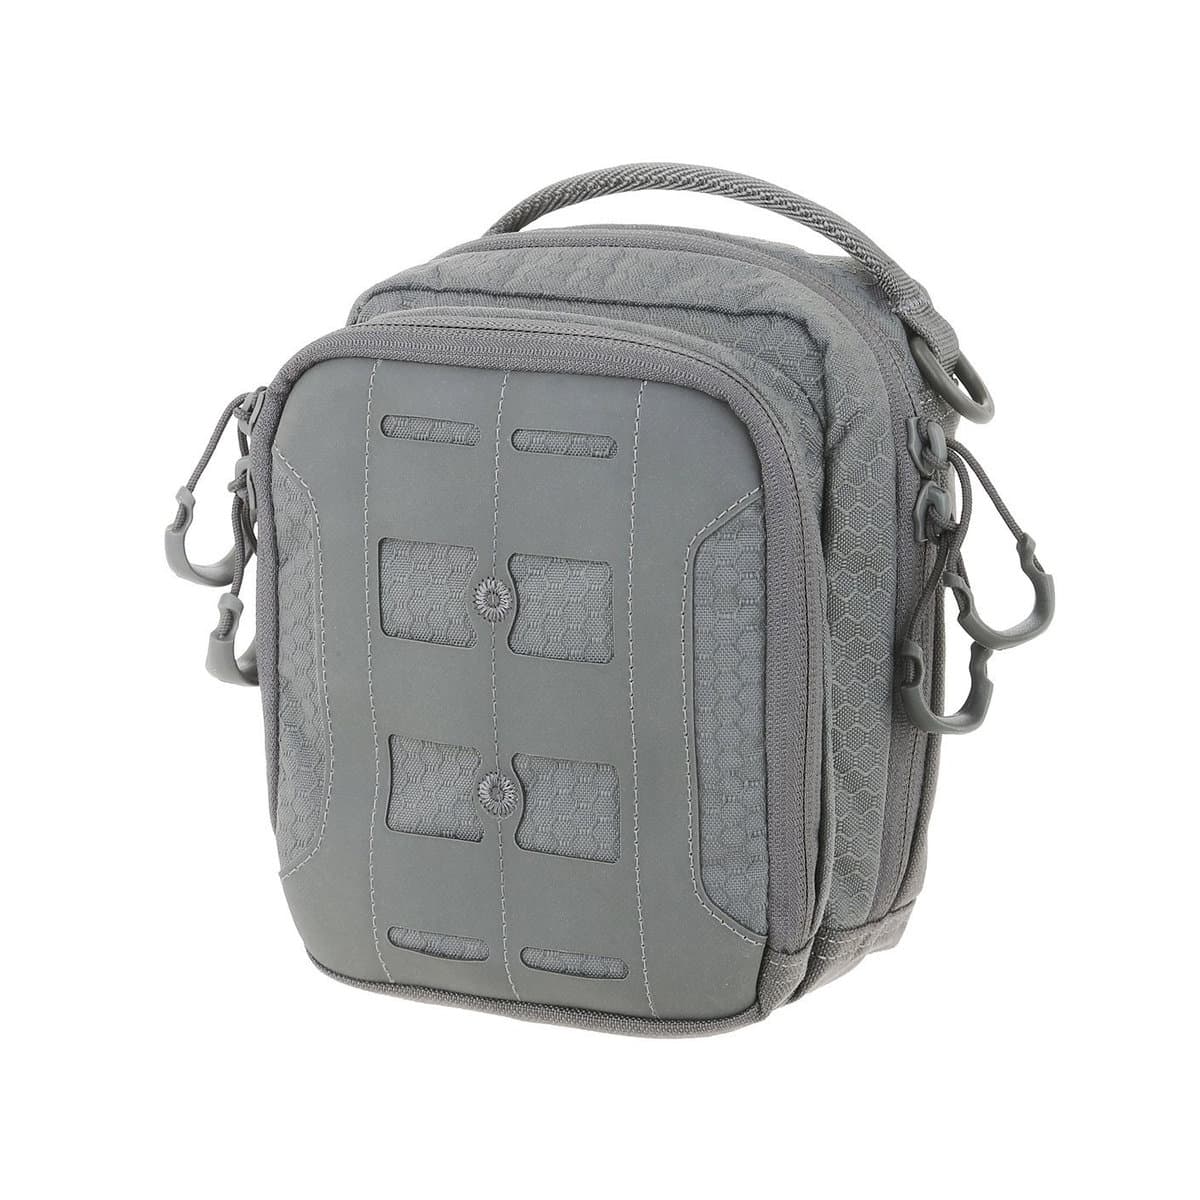 Maxpedition AUP -  Accordion Utility Pouch